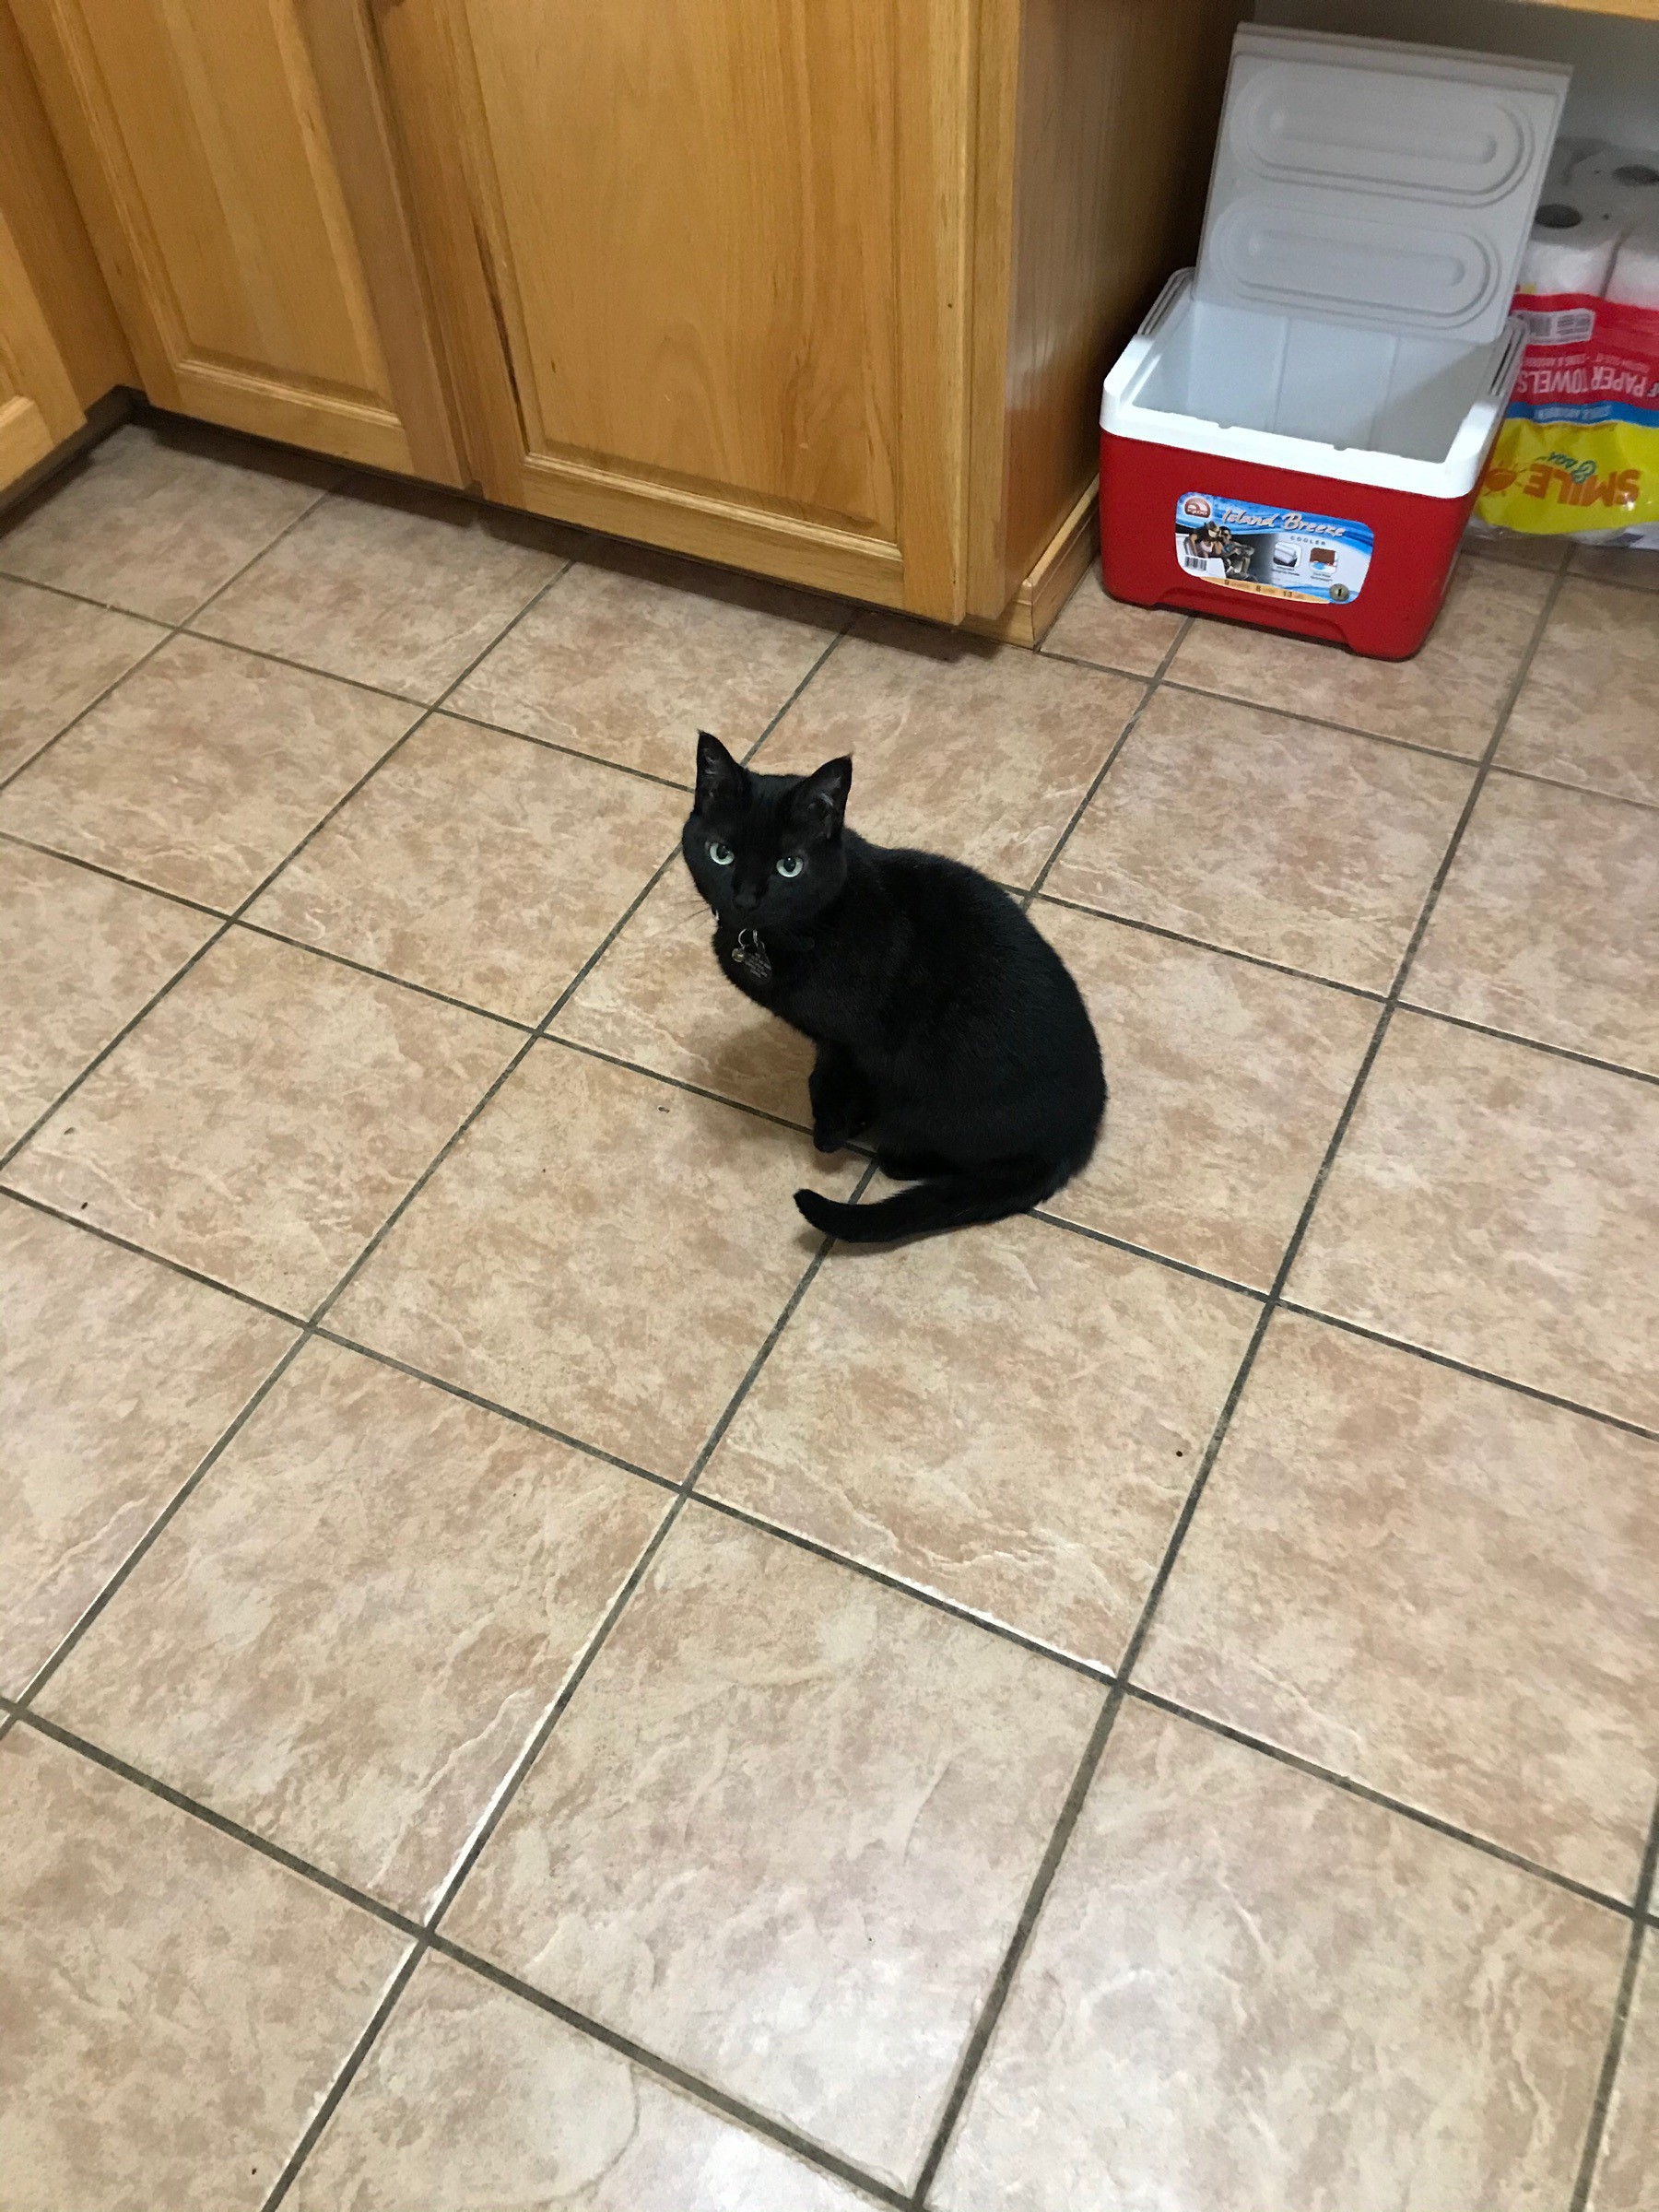 Nyx, a small black cat, sitting in the middle of the kitchen floor